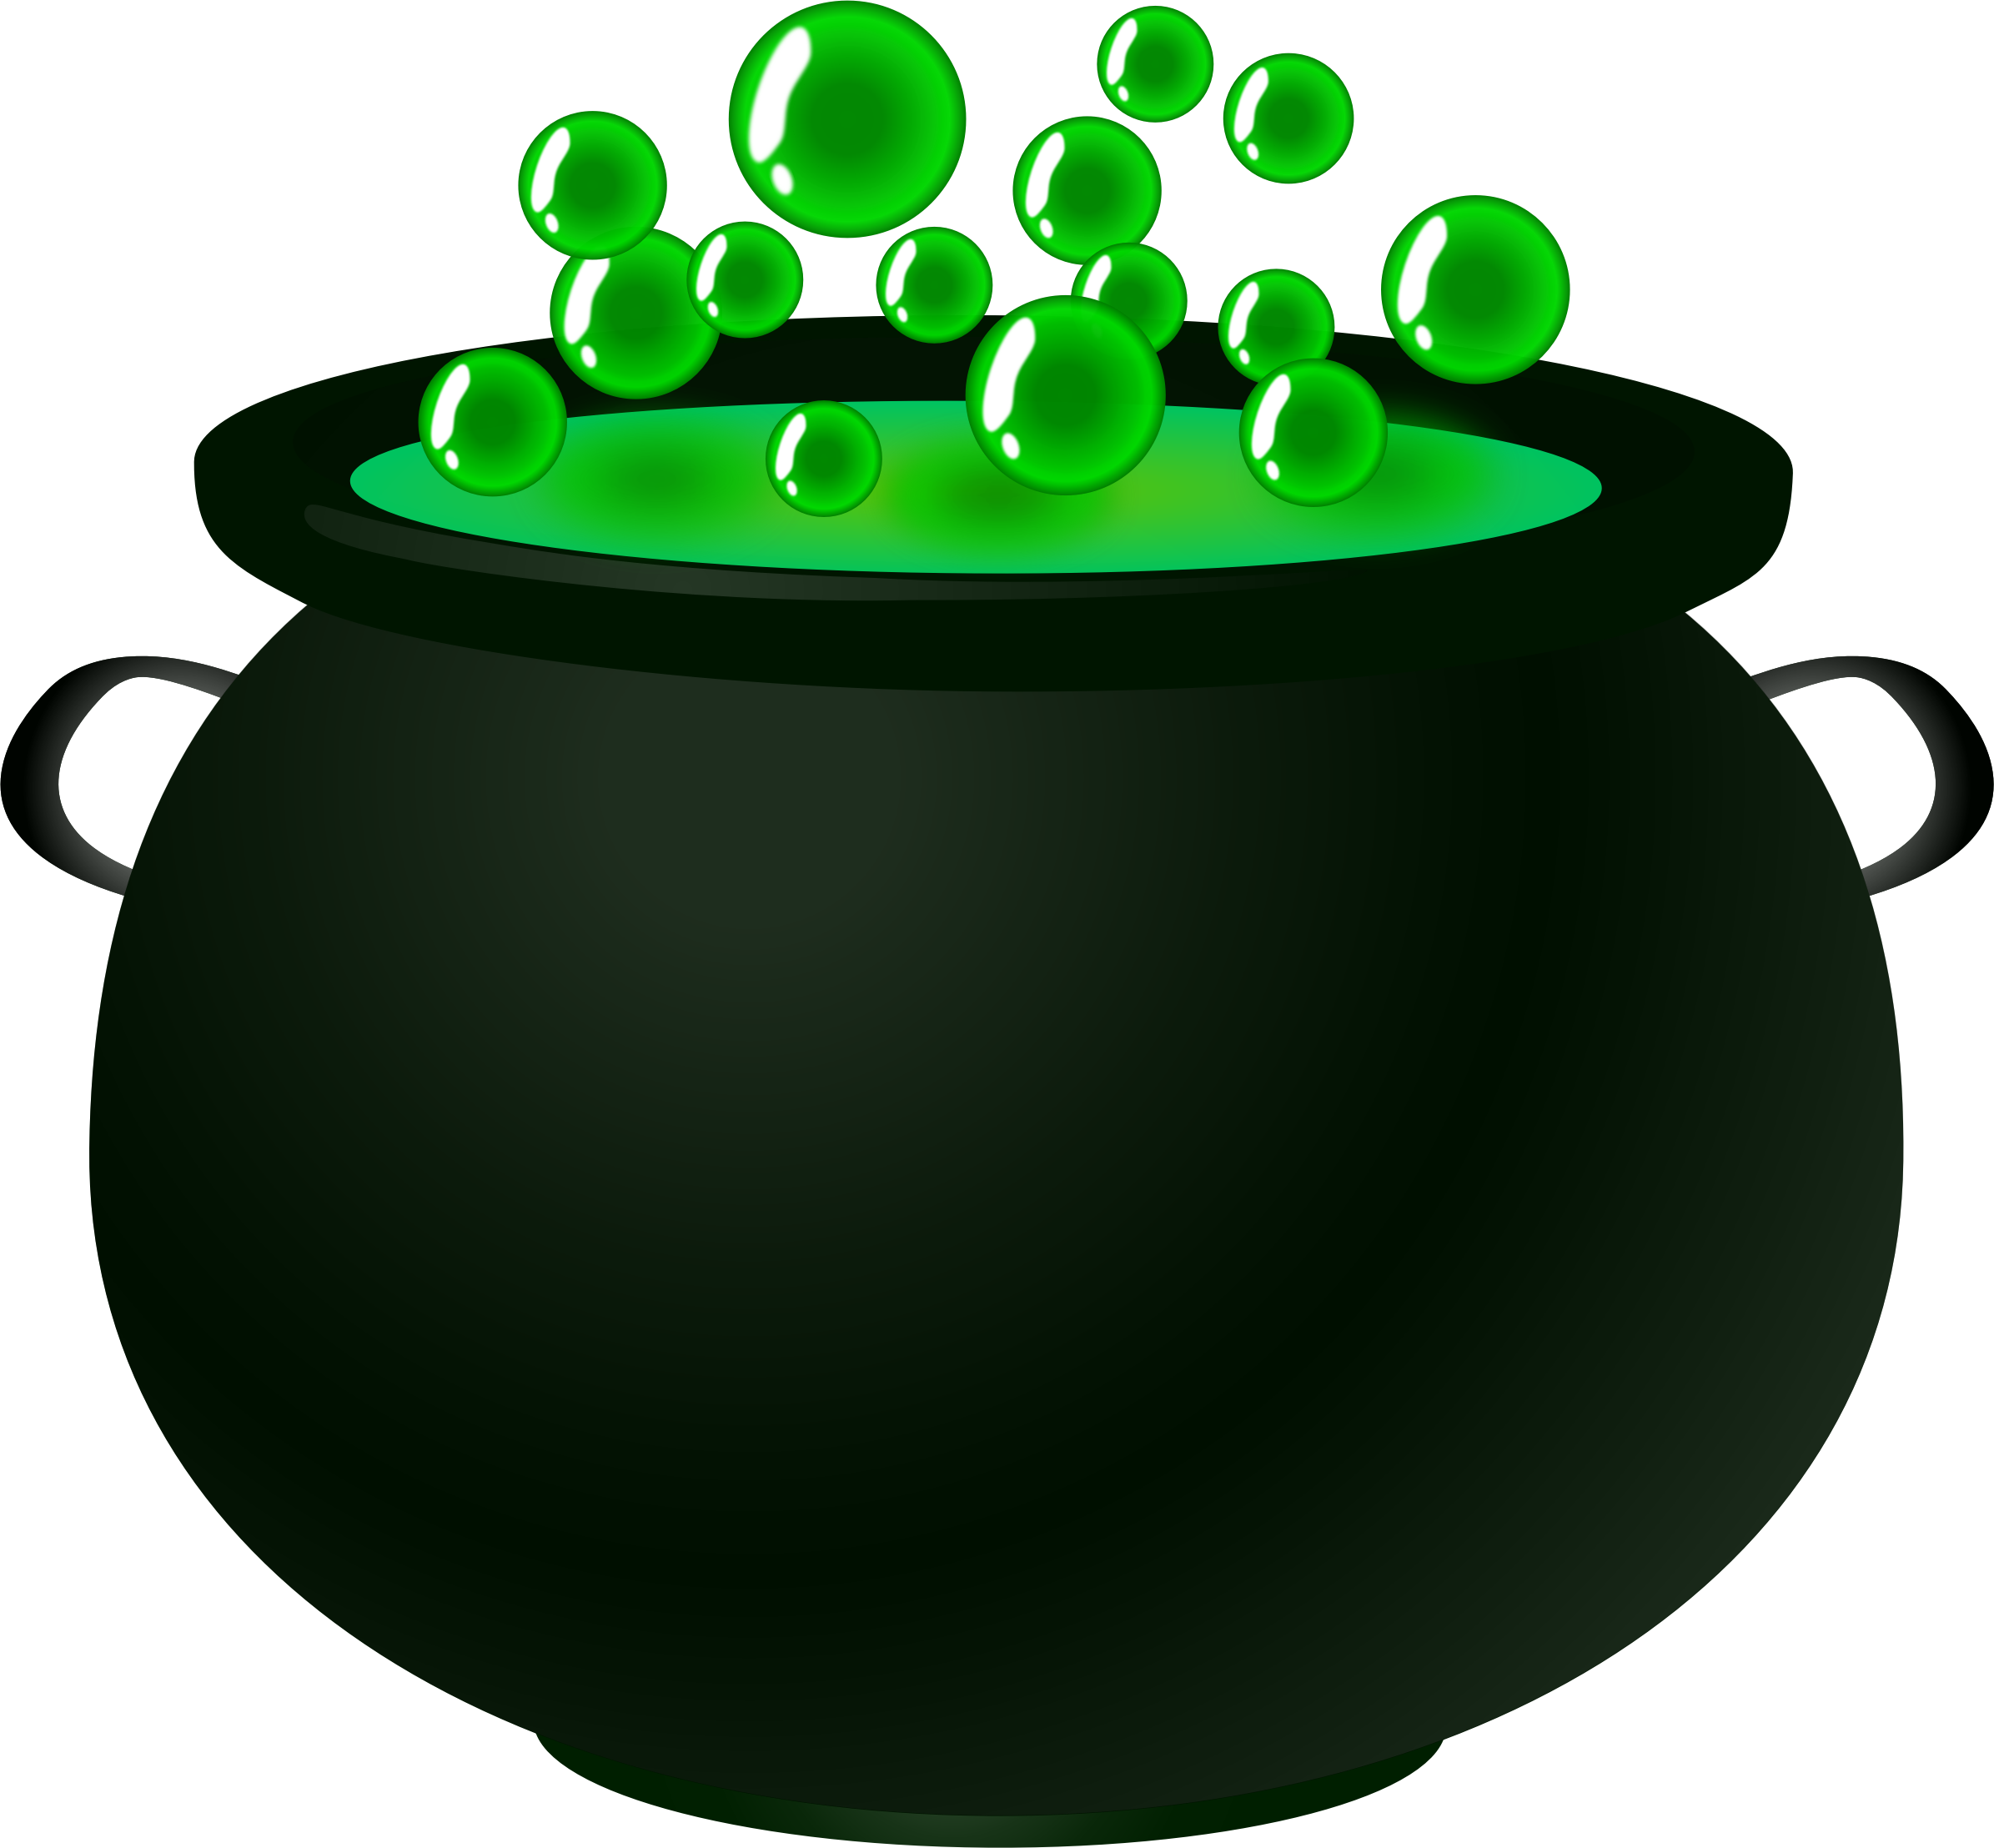 share clipart about Potion - Witches Cauldron Clipart, Find more high quali...